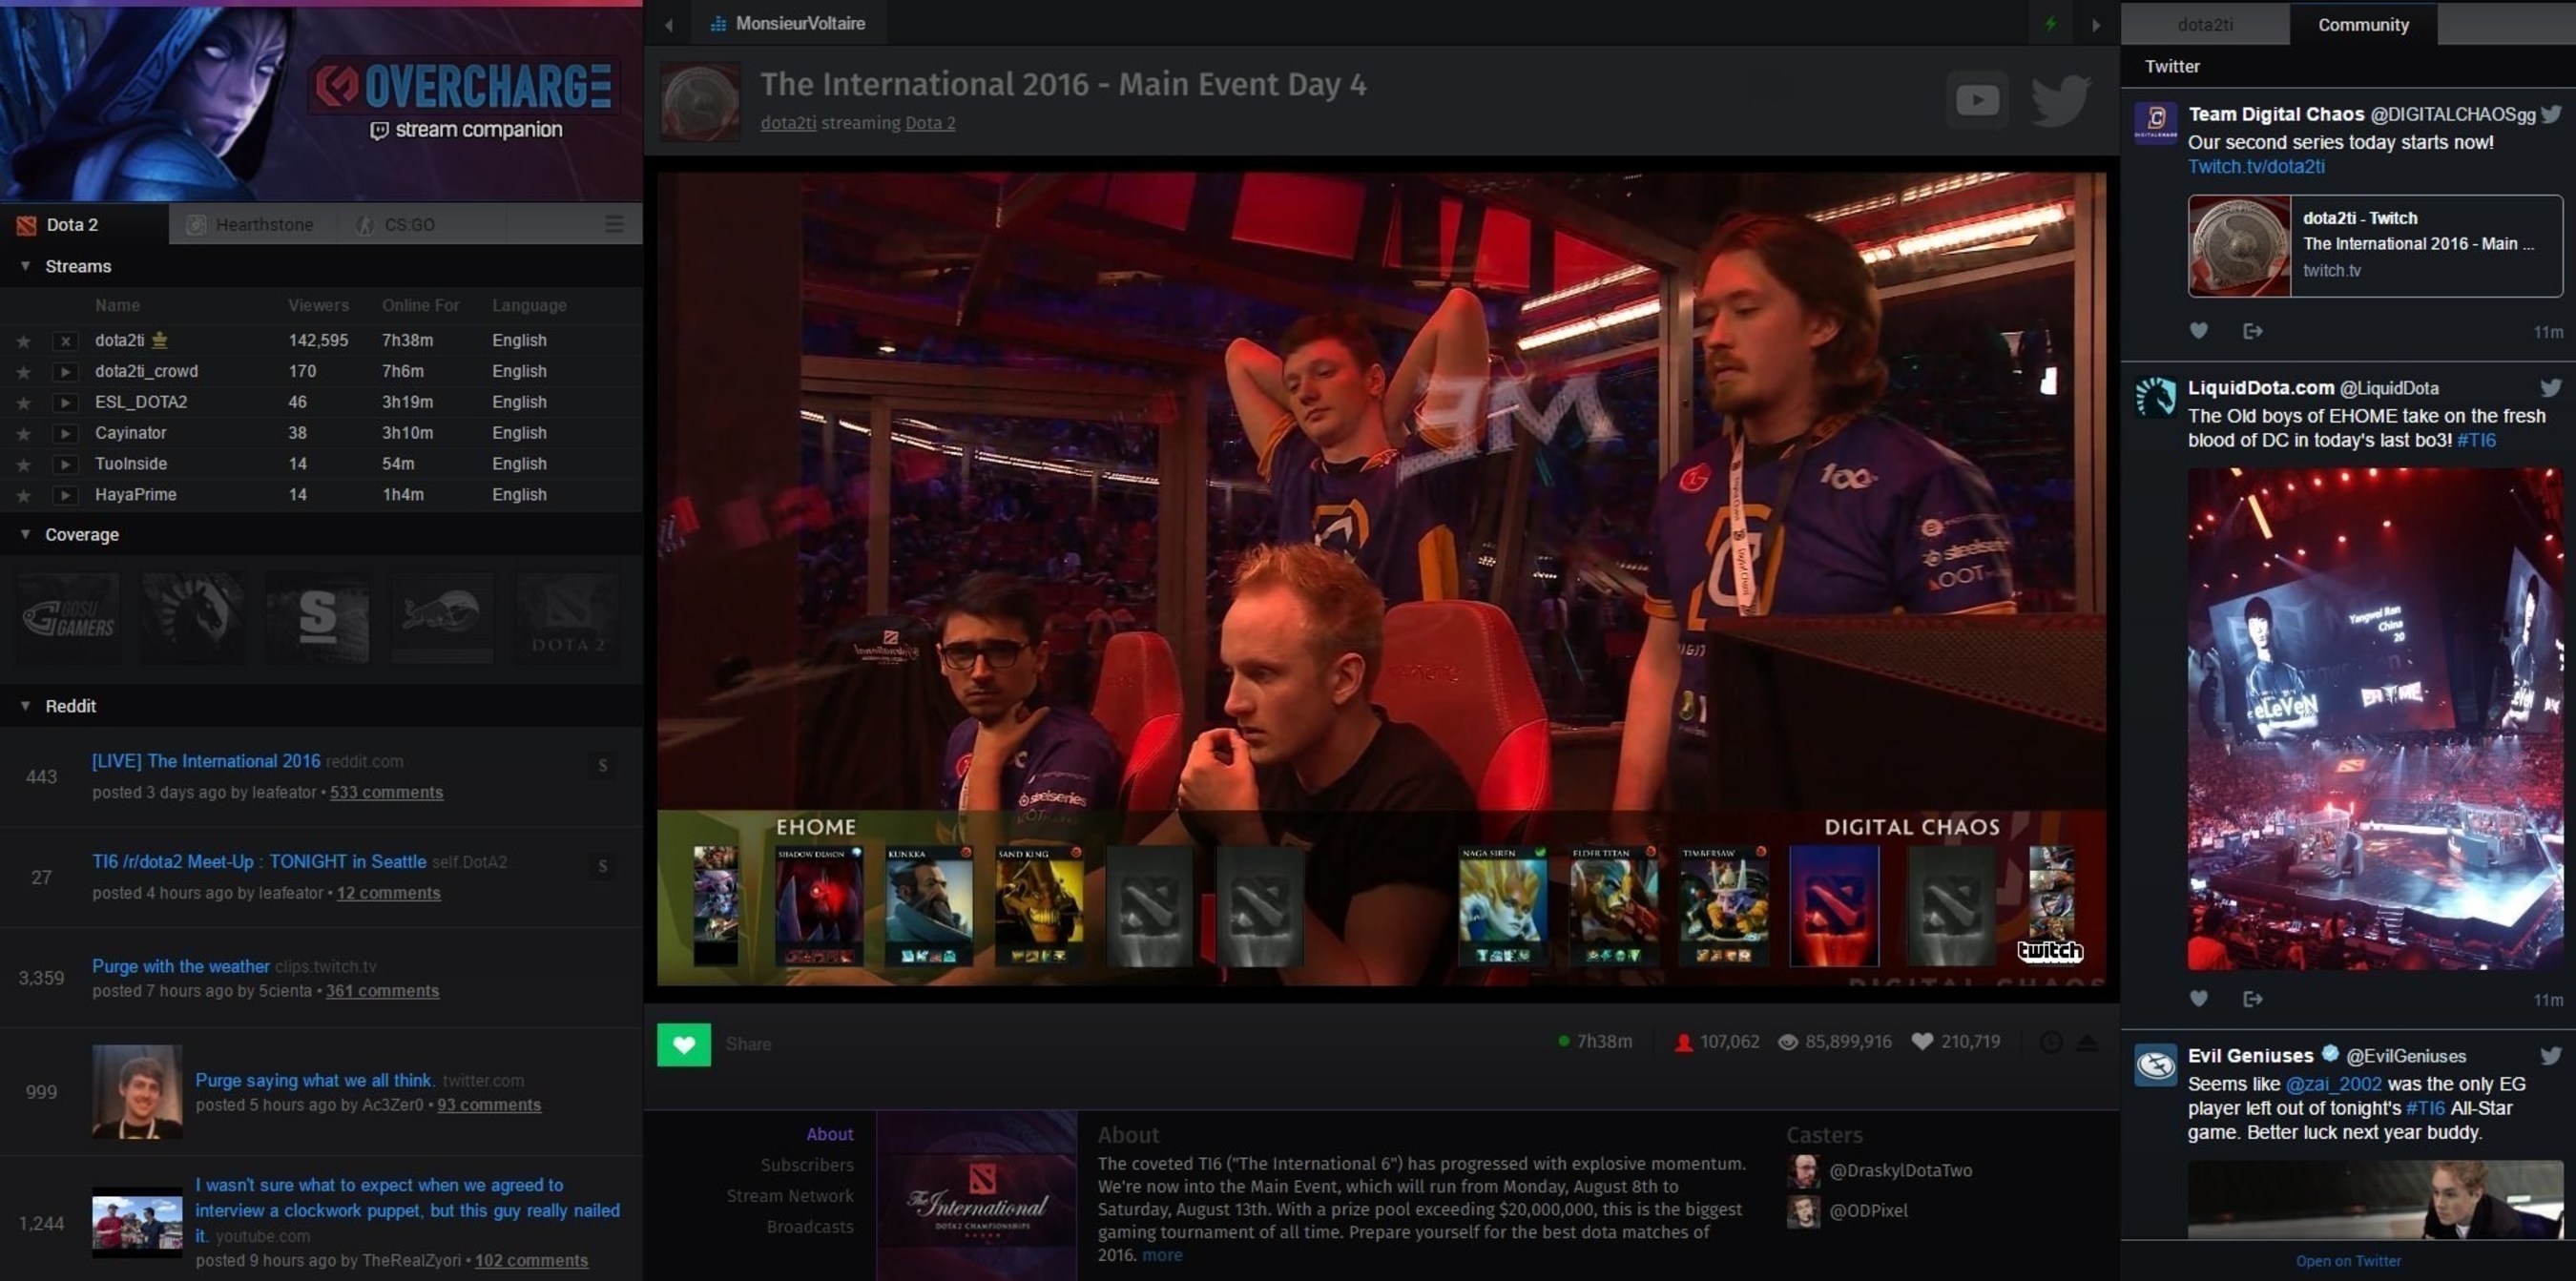 Screenshot of the Overcharge.tv application user interface. Breakout team 'Digital Chaos' vie for their share of the $20,000,000 prize pool at Valve's annual "The International 6" Dota 2 tournament. Exceeding all expectations, the American-European hybrid team finishes 2nd place, taking home US$3.5 million dollars.